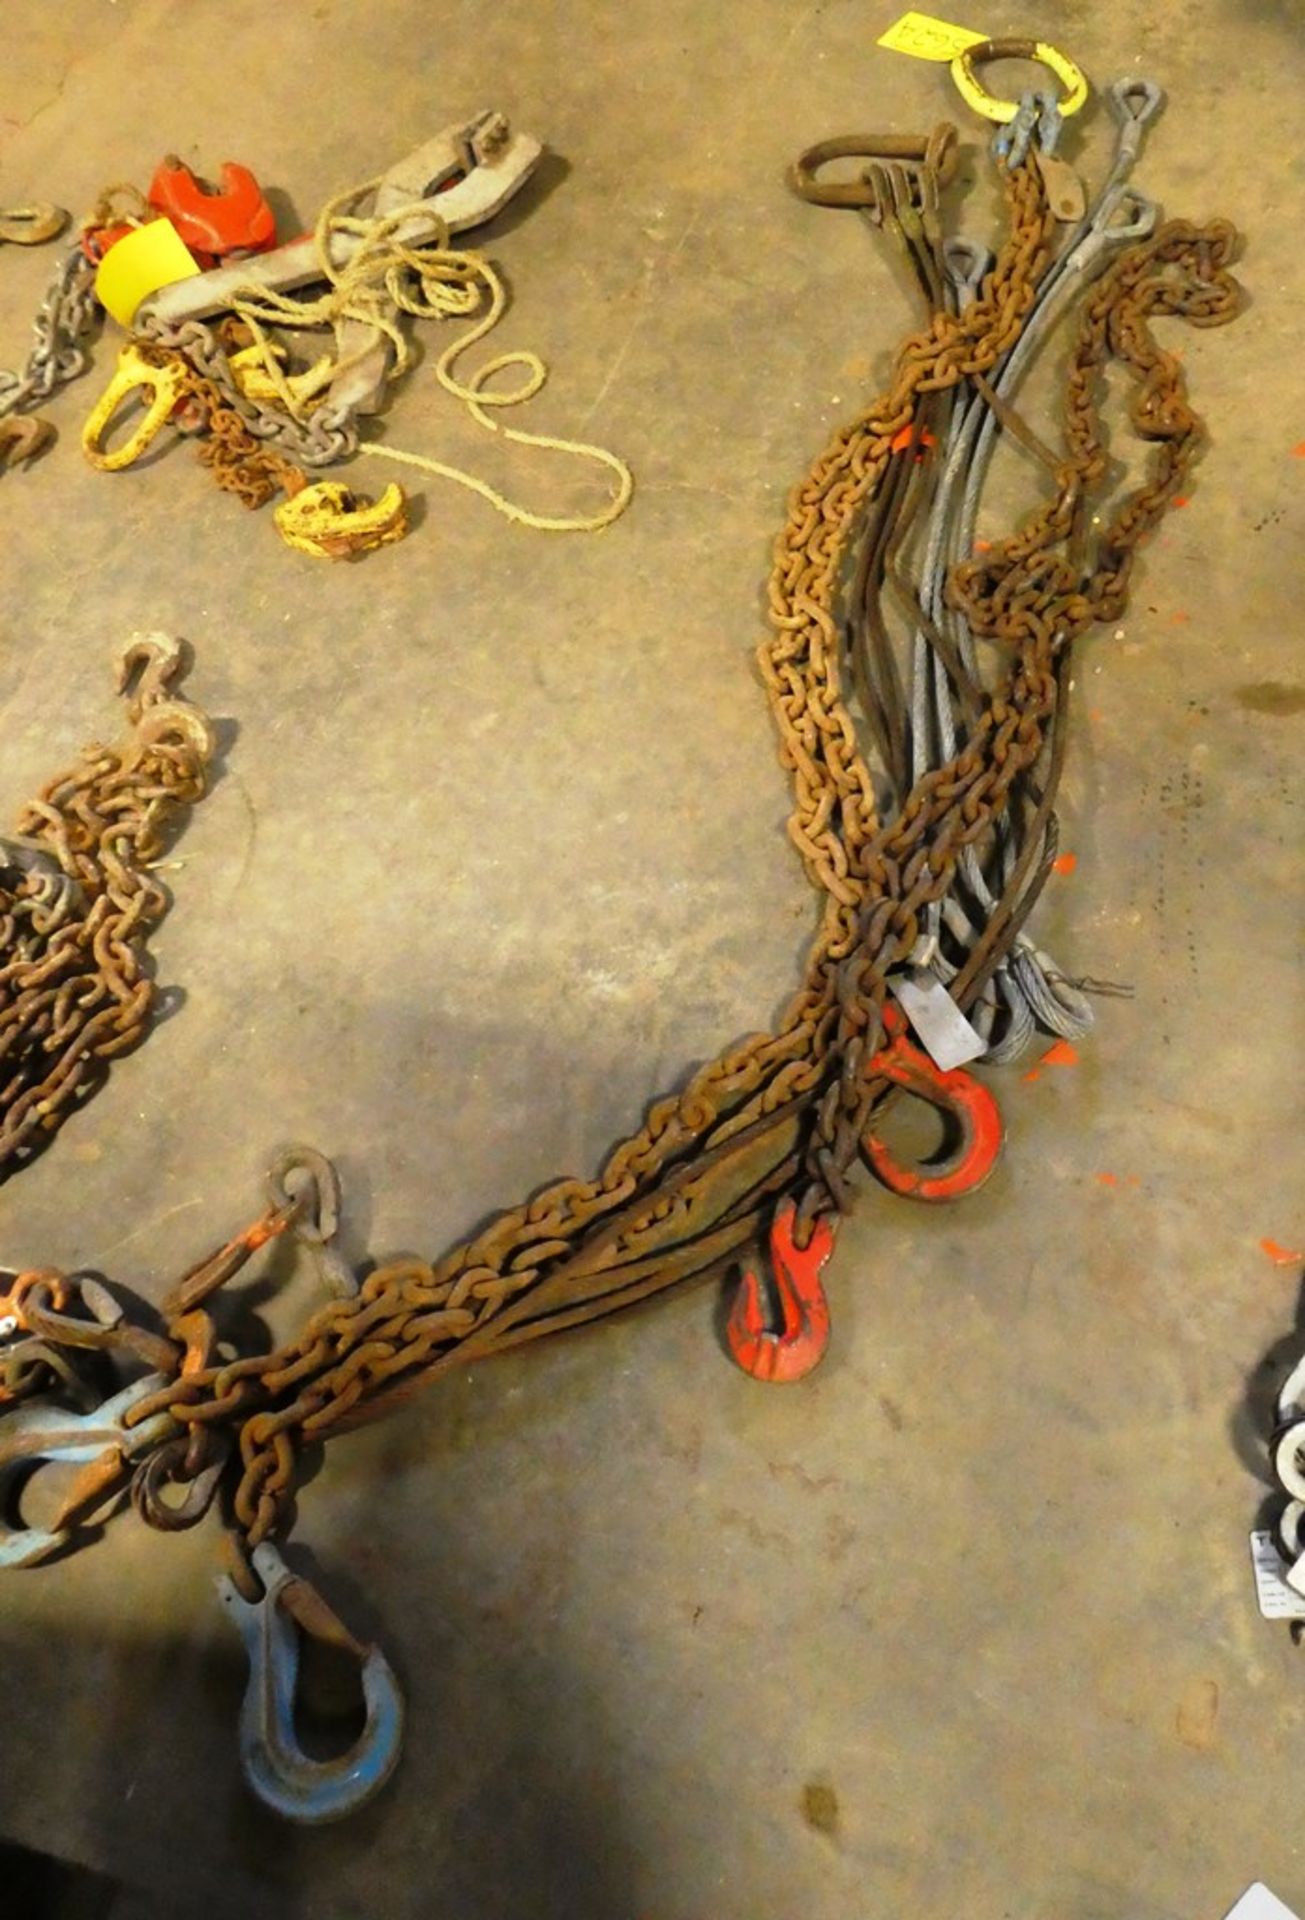 L/O 2 WAY CHAIN SLING, 4 WAY CABLE SLING, CHAINS & HOOKS, CABLES W/ EYES